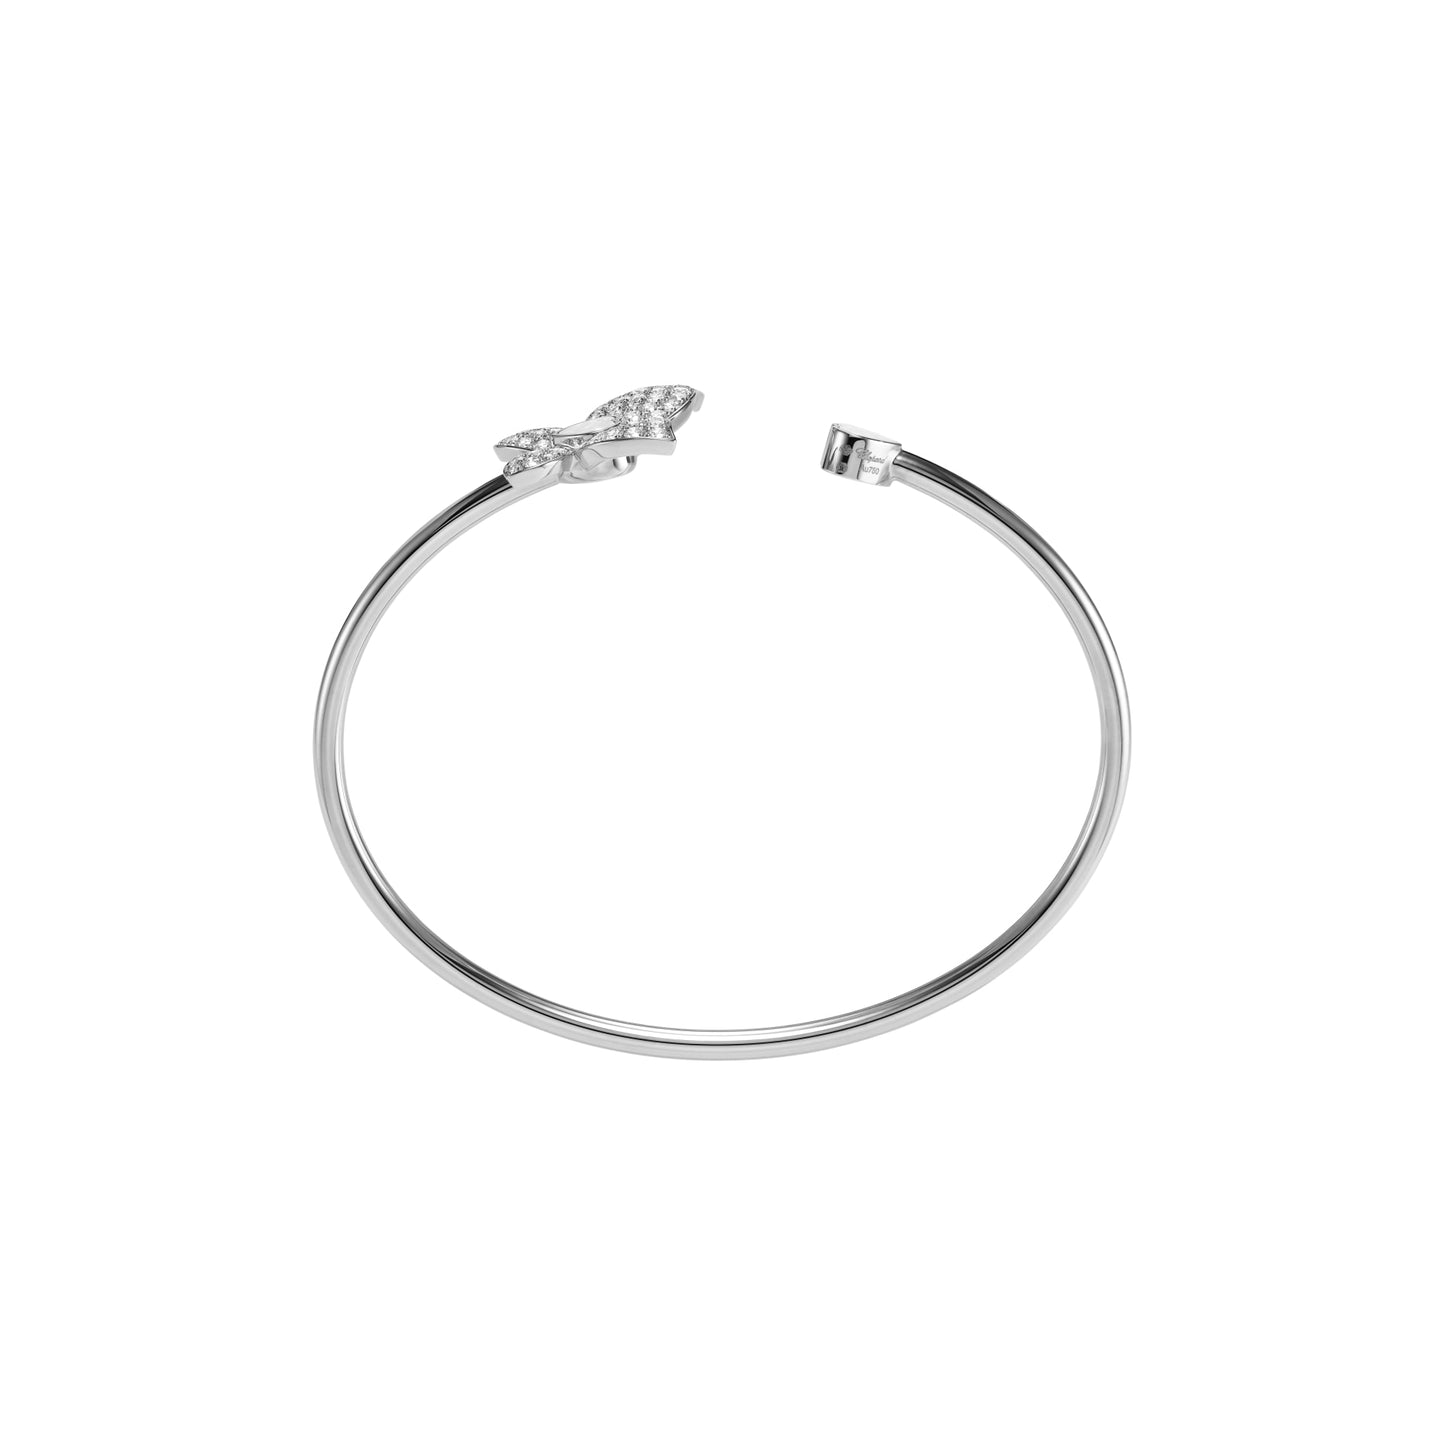 HAPPY BUTTERFLY X MARIAH CAREY BANGLE, ETHICAL WHITE GOLD, DIAMONDS 858536-1002